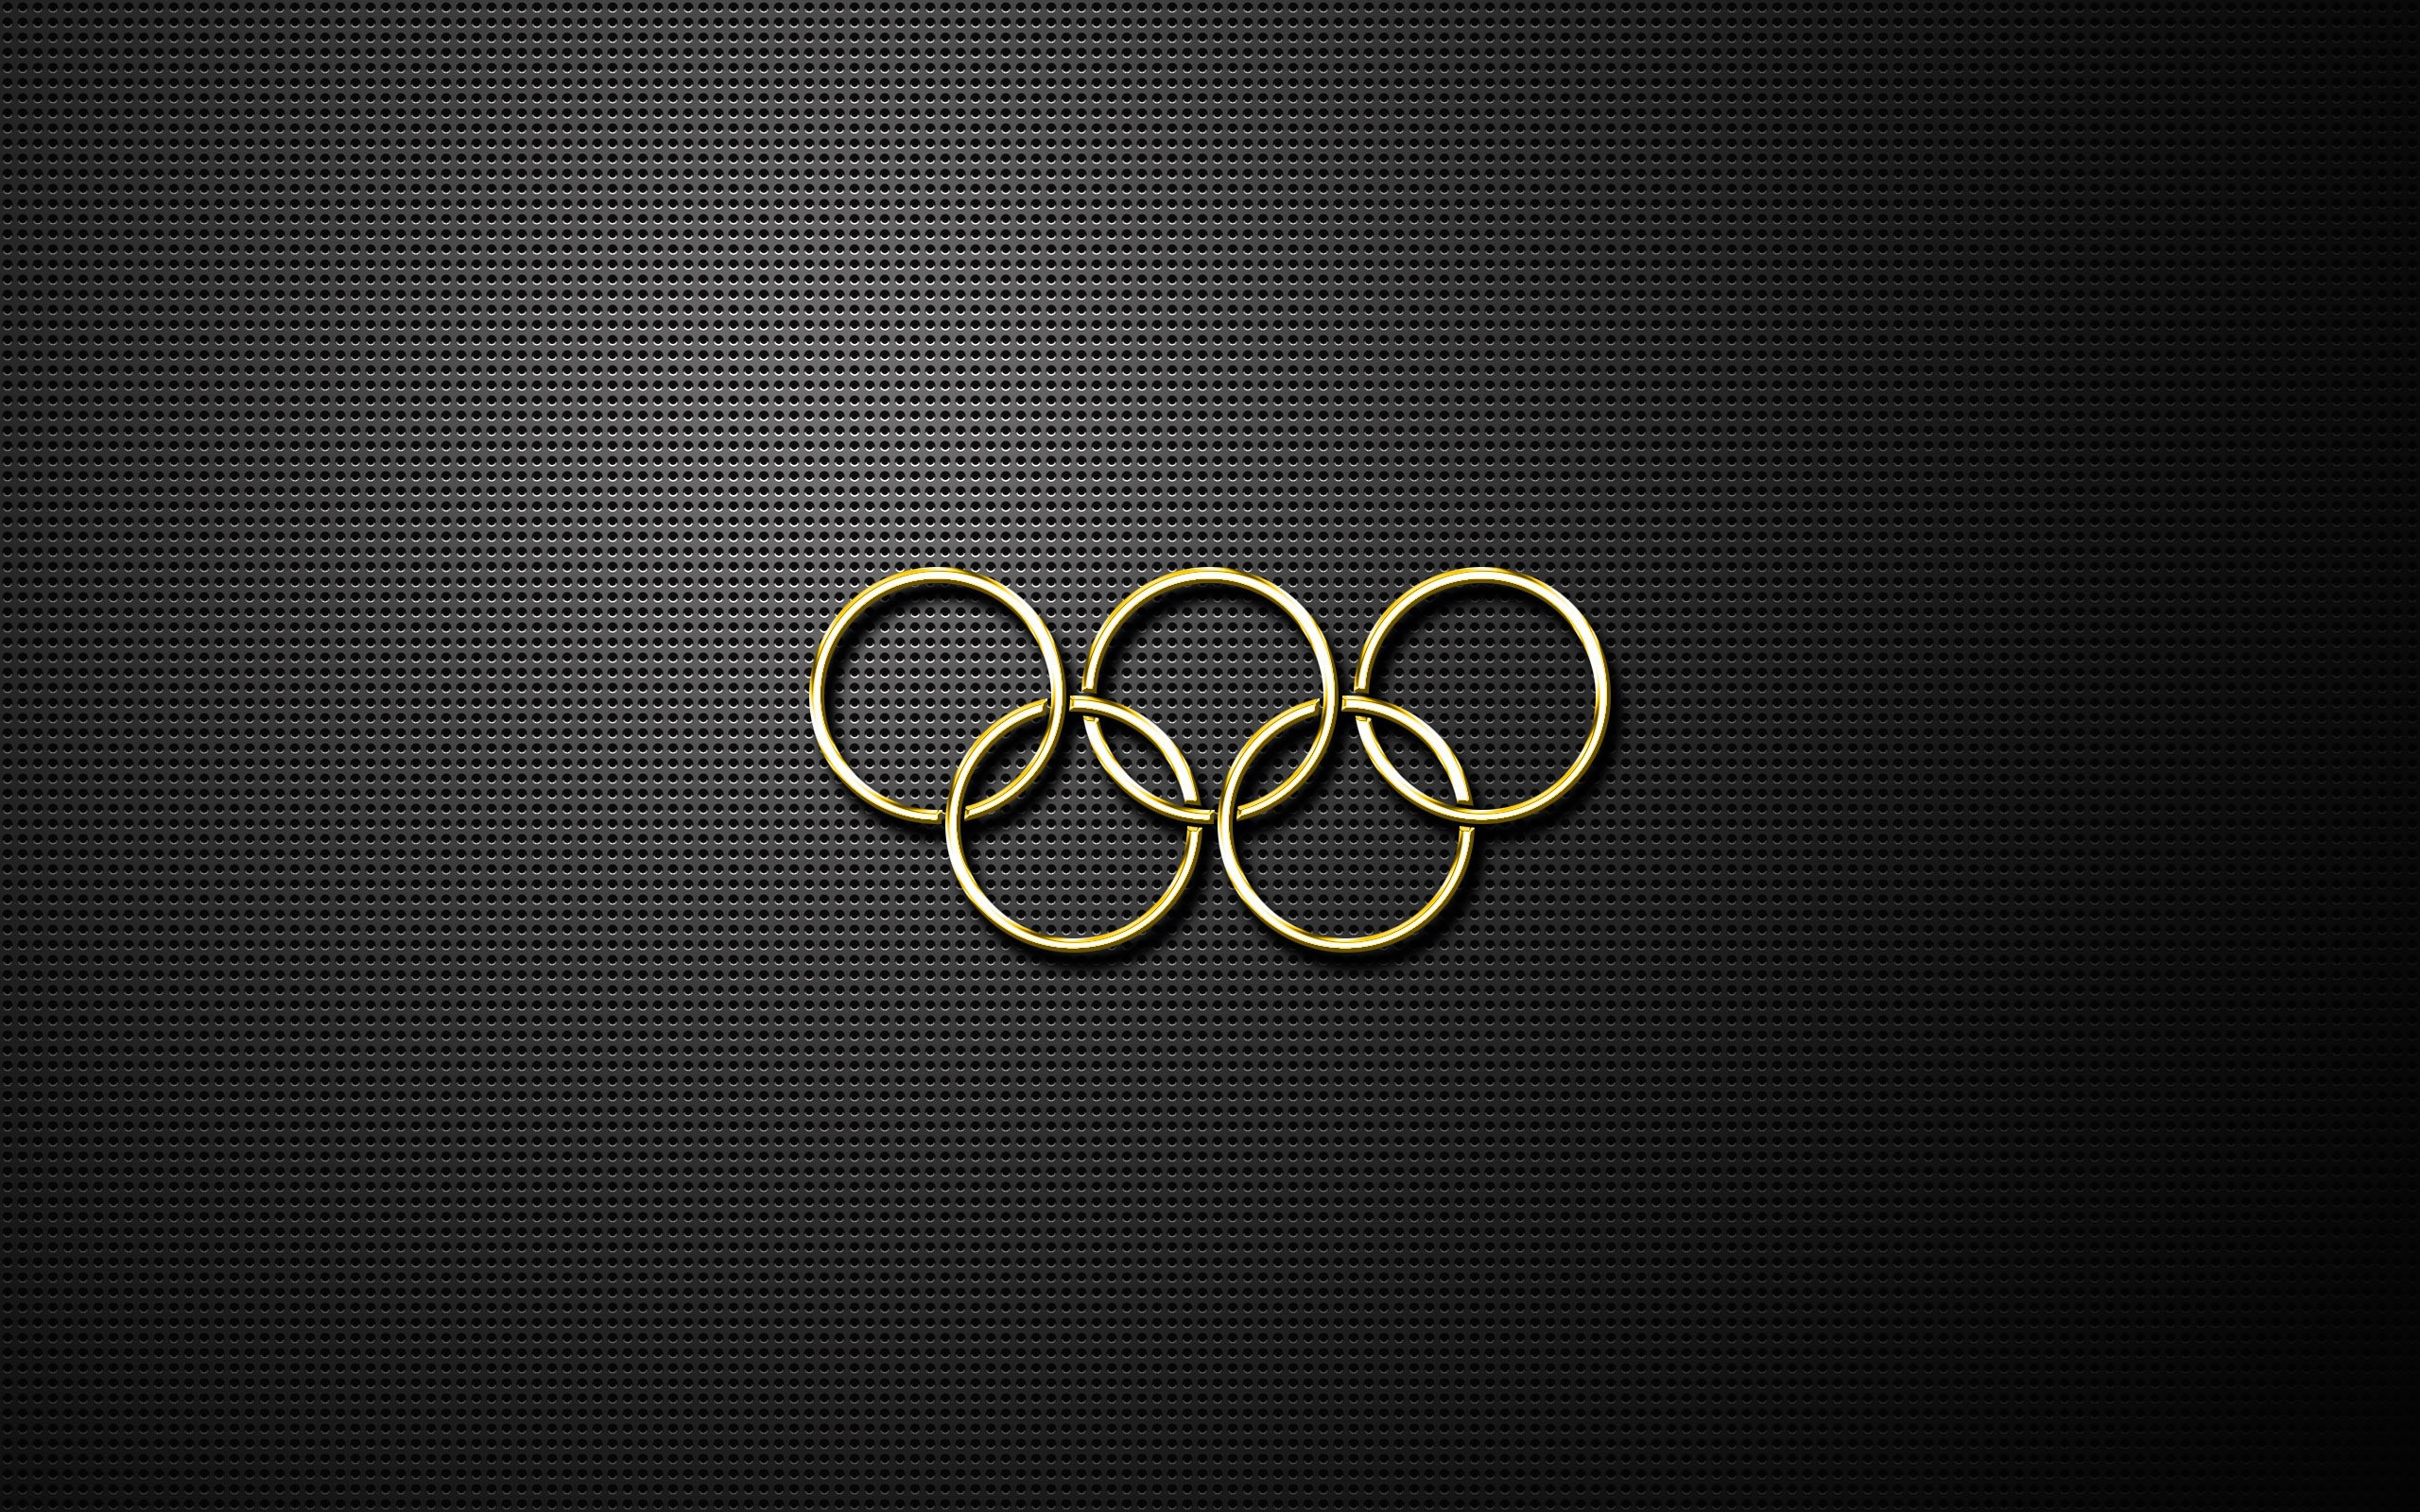 Logo Olympics wallpapers and images - wallpapers, pictures, photos